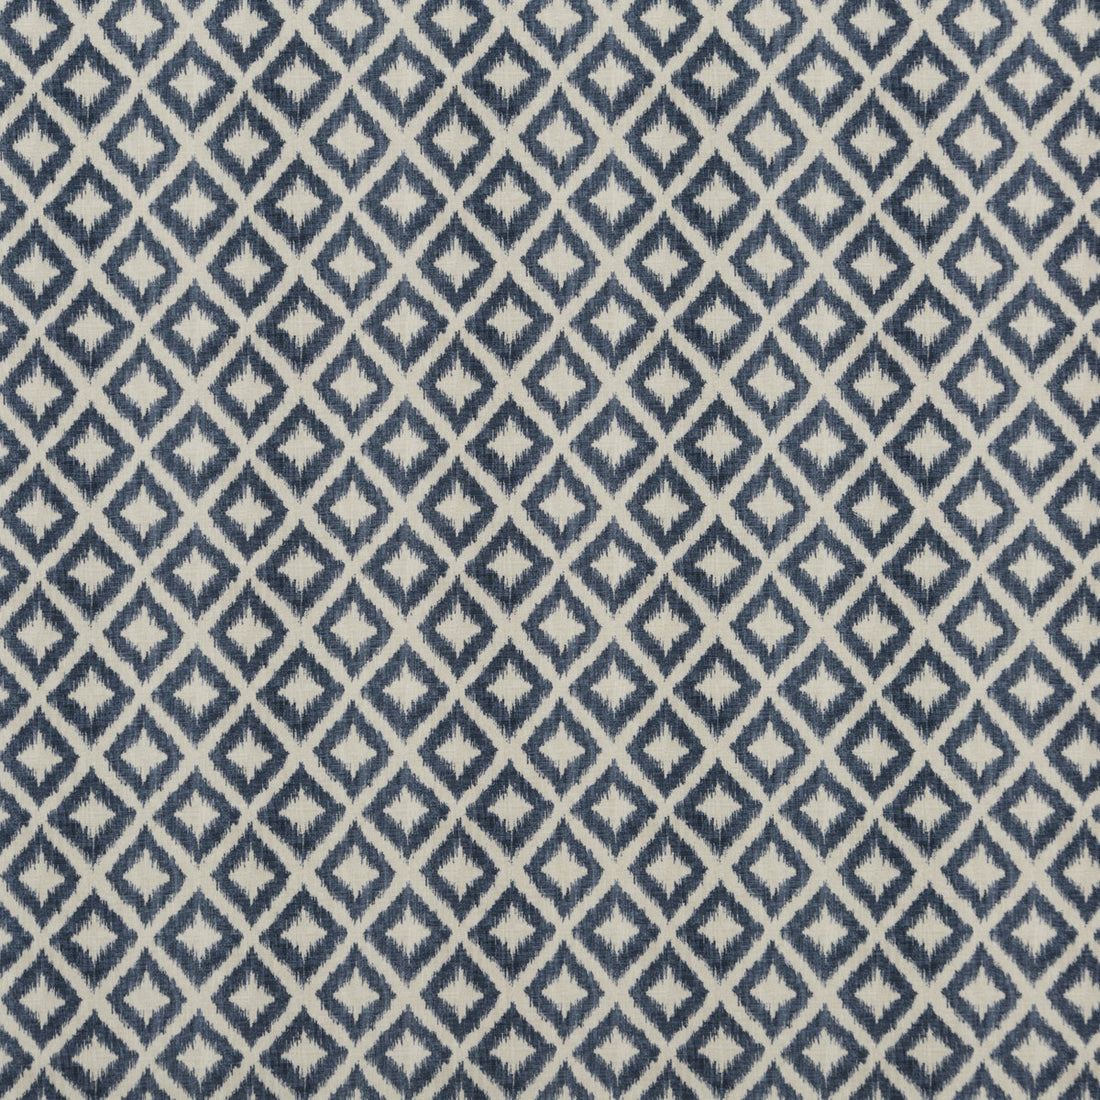 Salsa Diamond fabric in indigo color - pattern PP50431.2.0 - by Baker Lifestyle in the Carnival collection